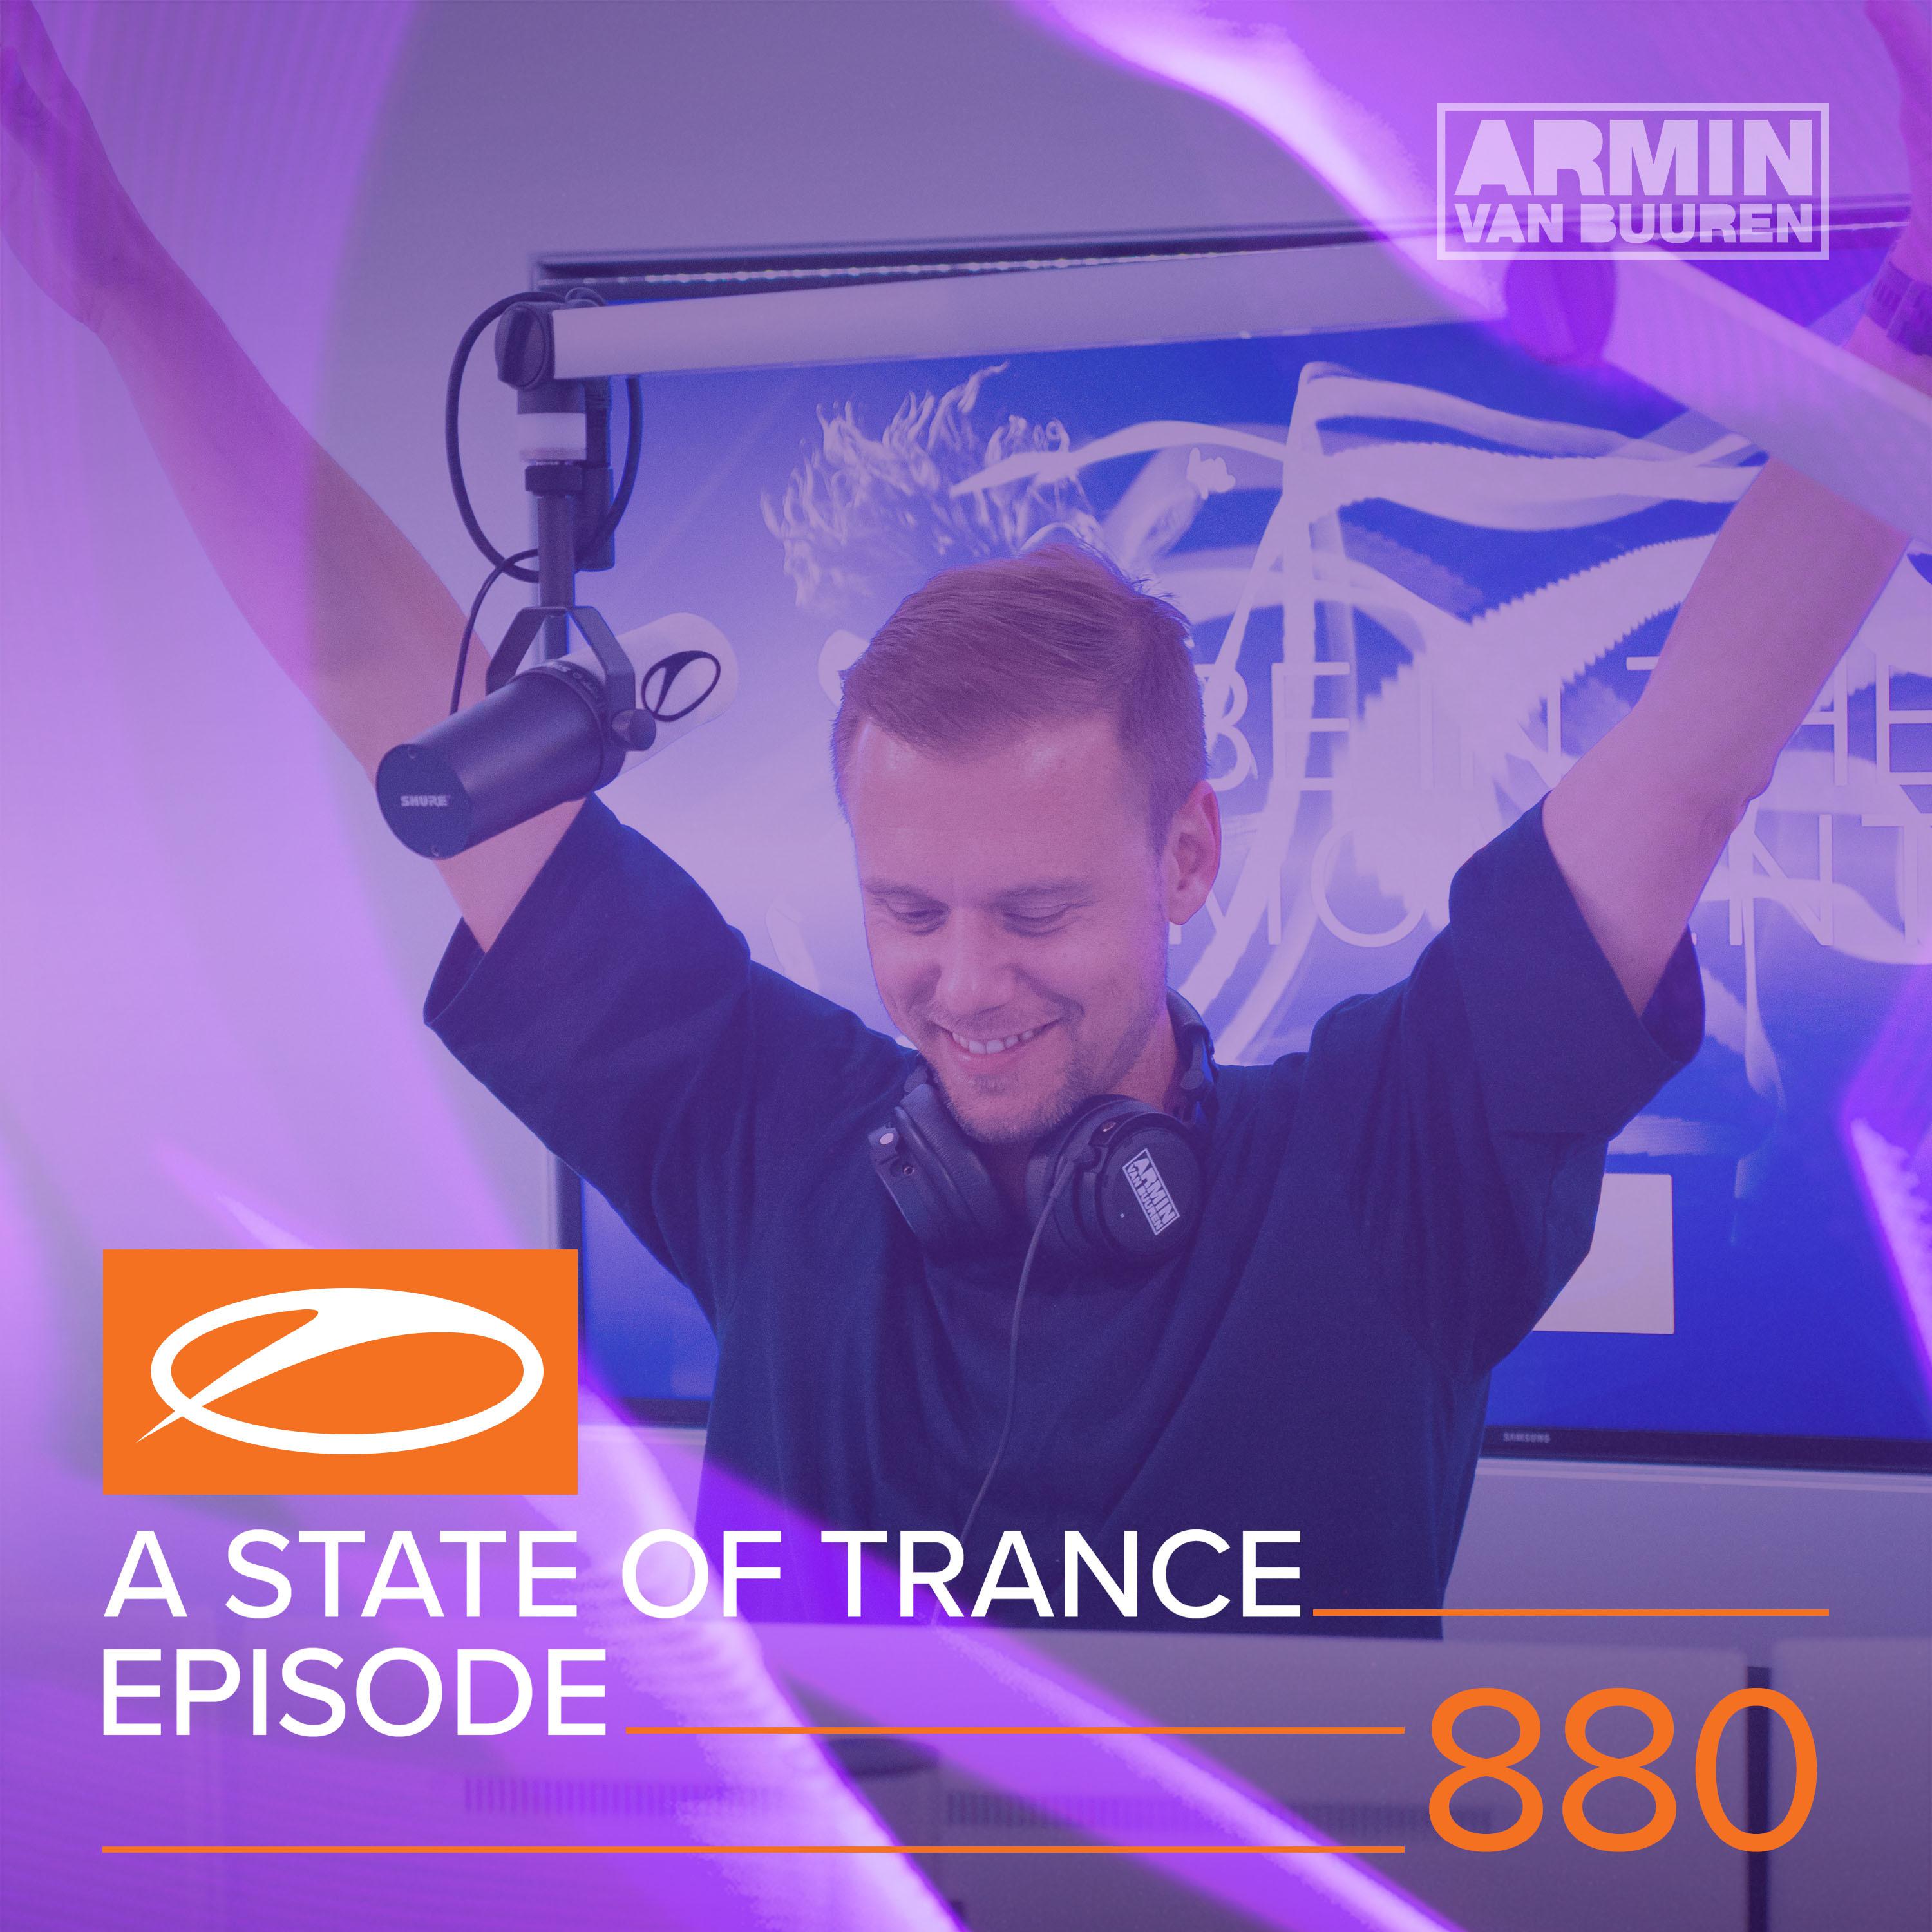 A State Of Trance (ASOT 880) (Big News! A State Of Trance, Pt. 2)